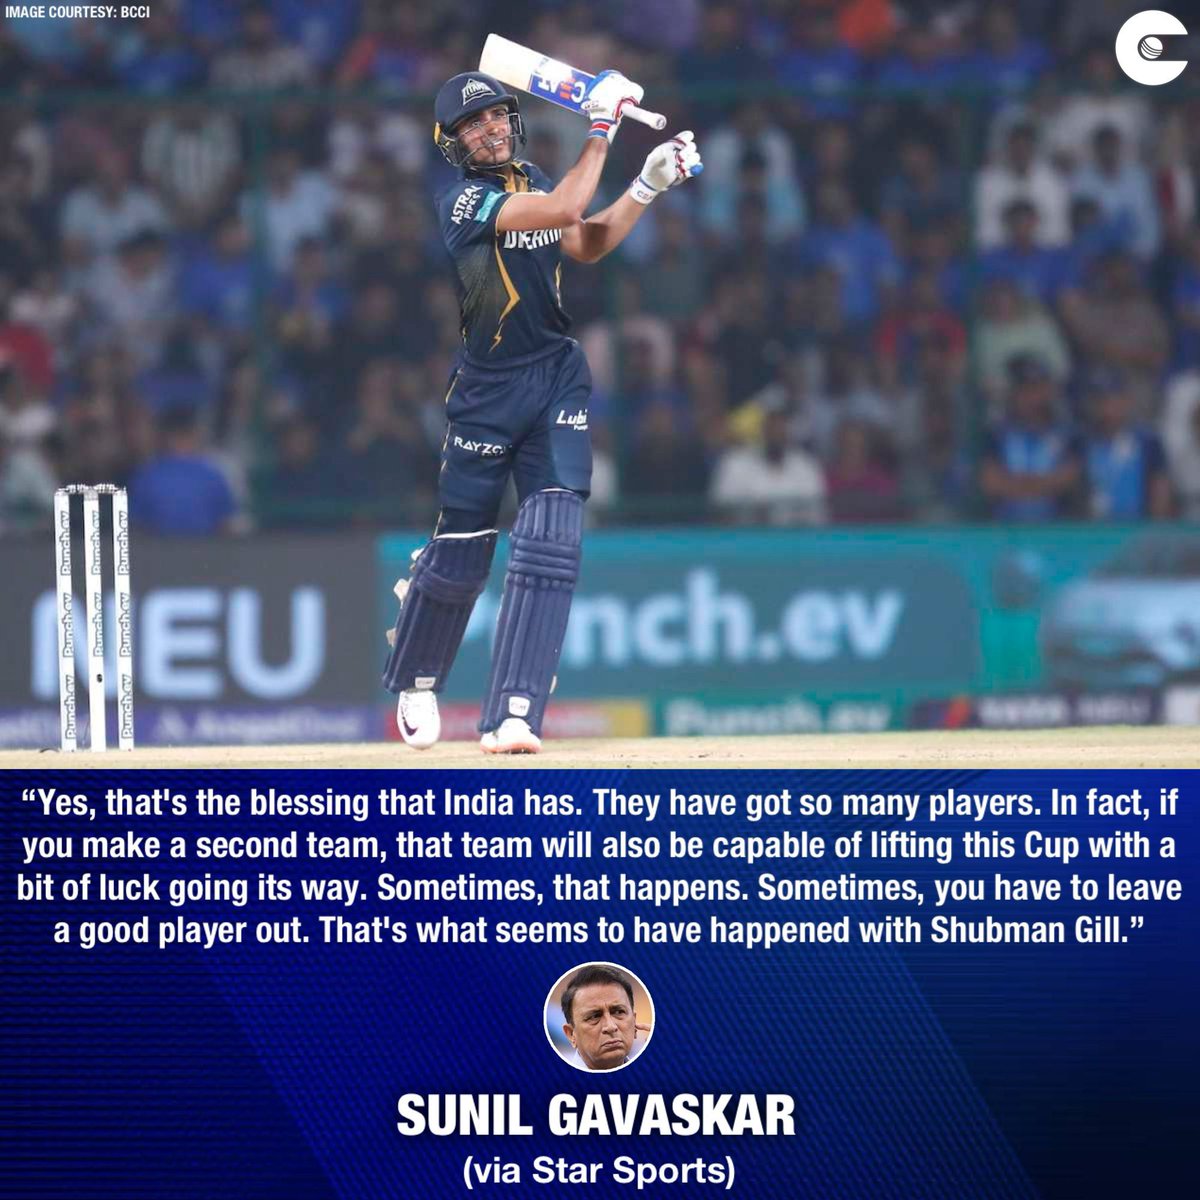 #SunilGavaskar opines on #ShubmanGill's absence from the #TeamIndia squad for the #T20WorldCup.